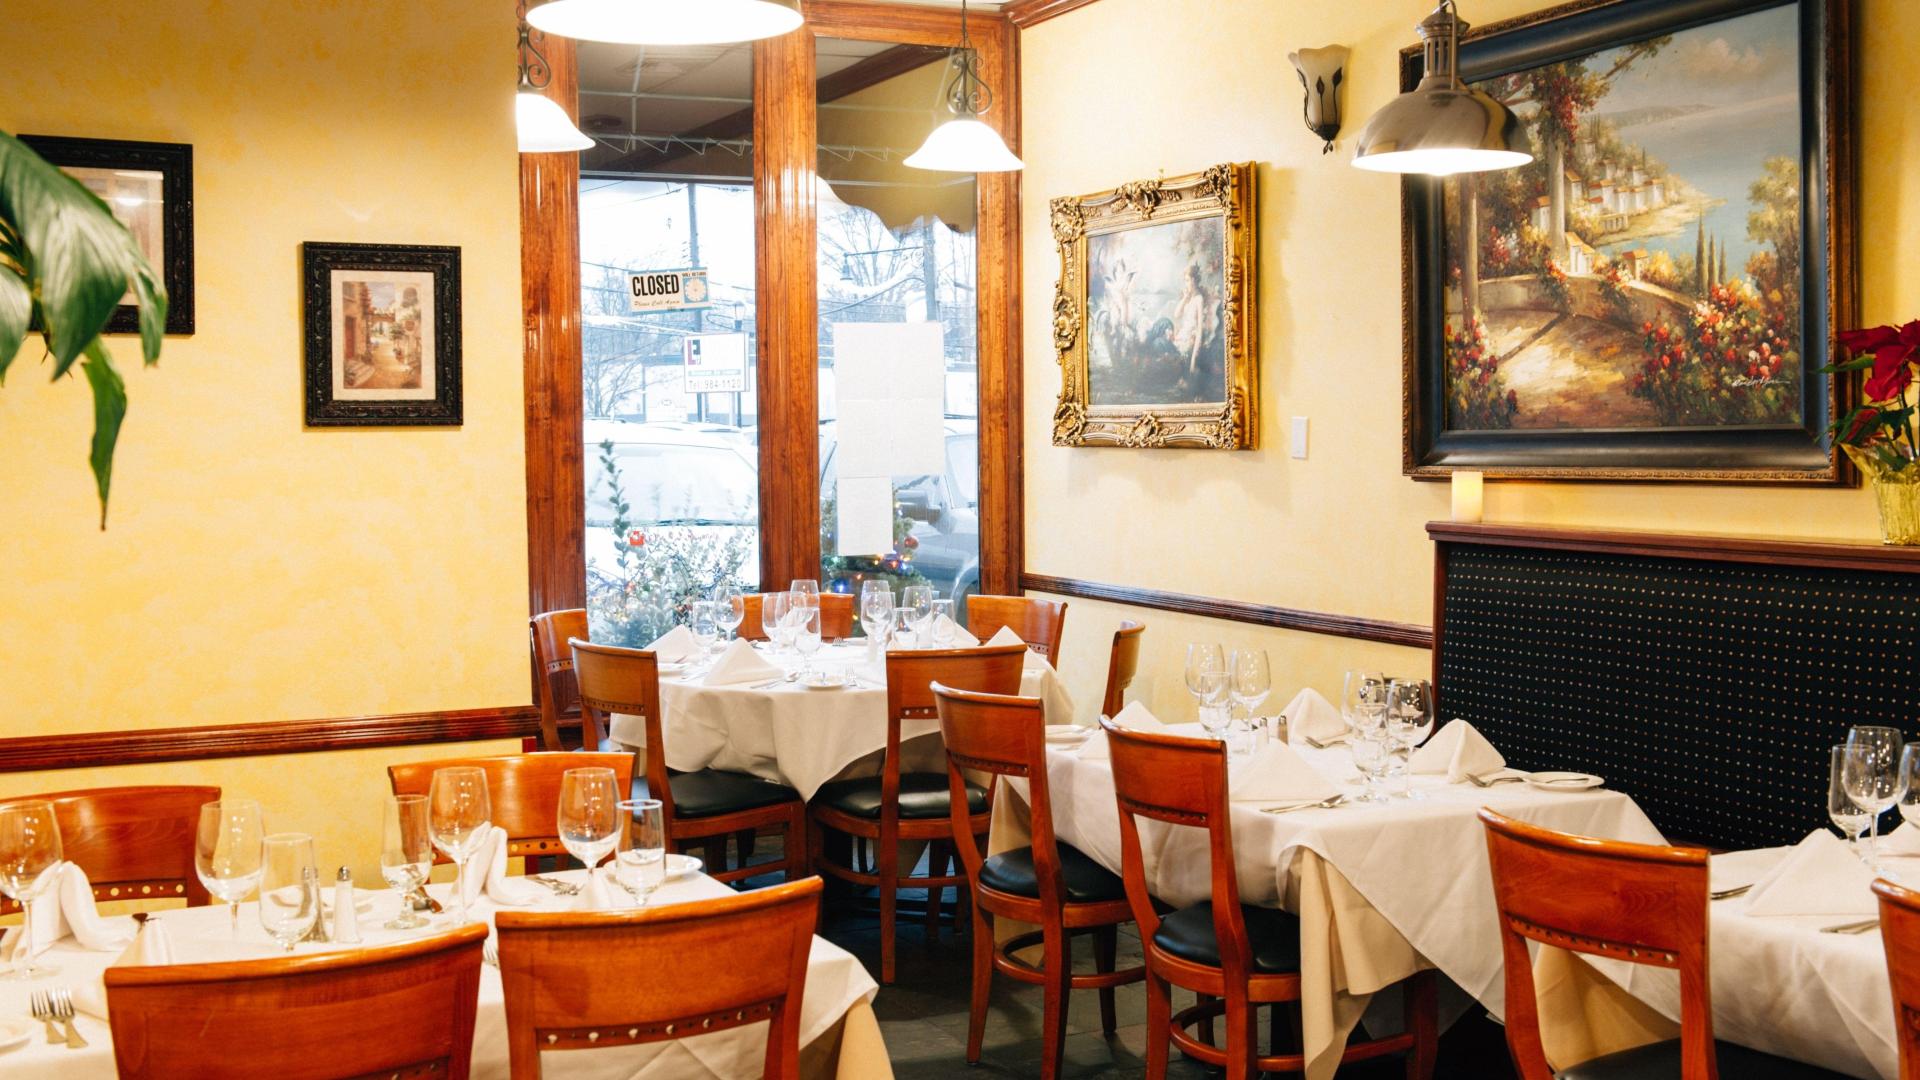 Restaurants with Private Rooms for Rent in Staten Island, NY